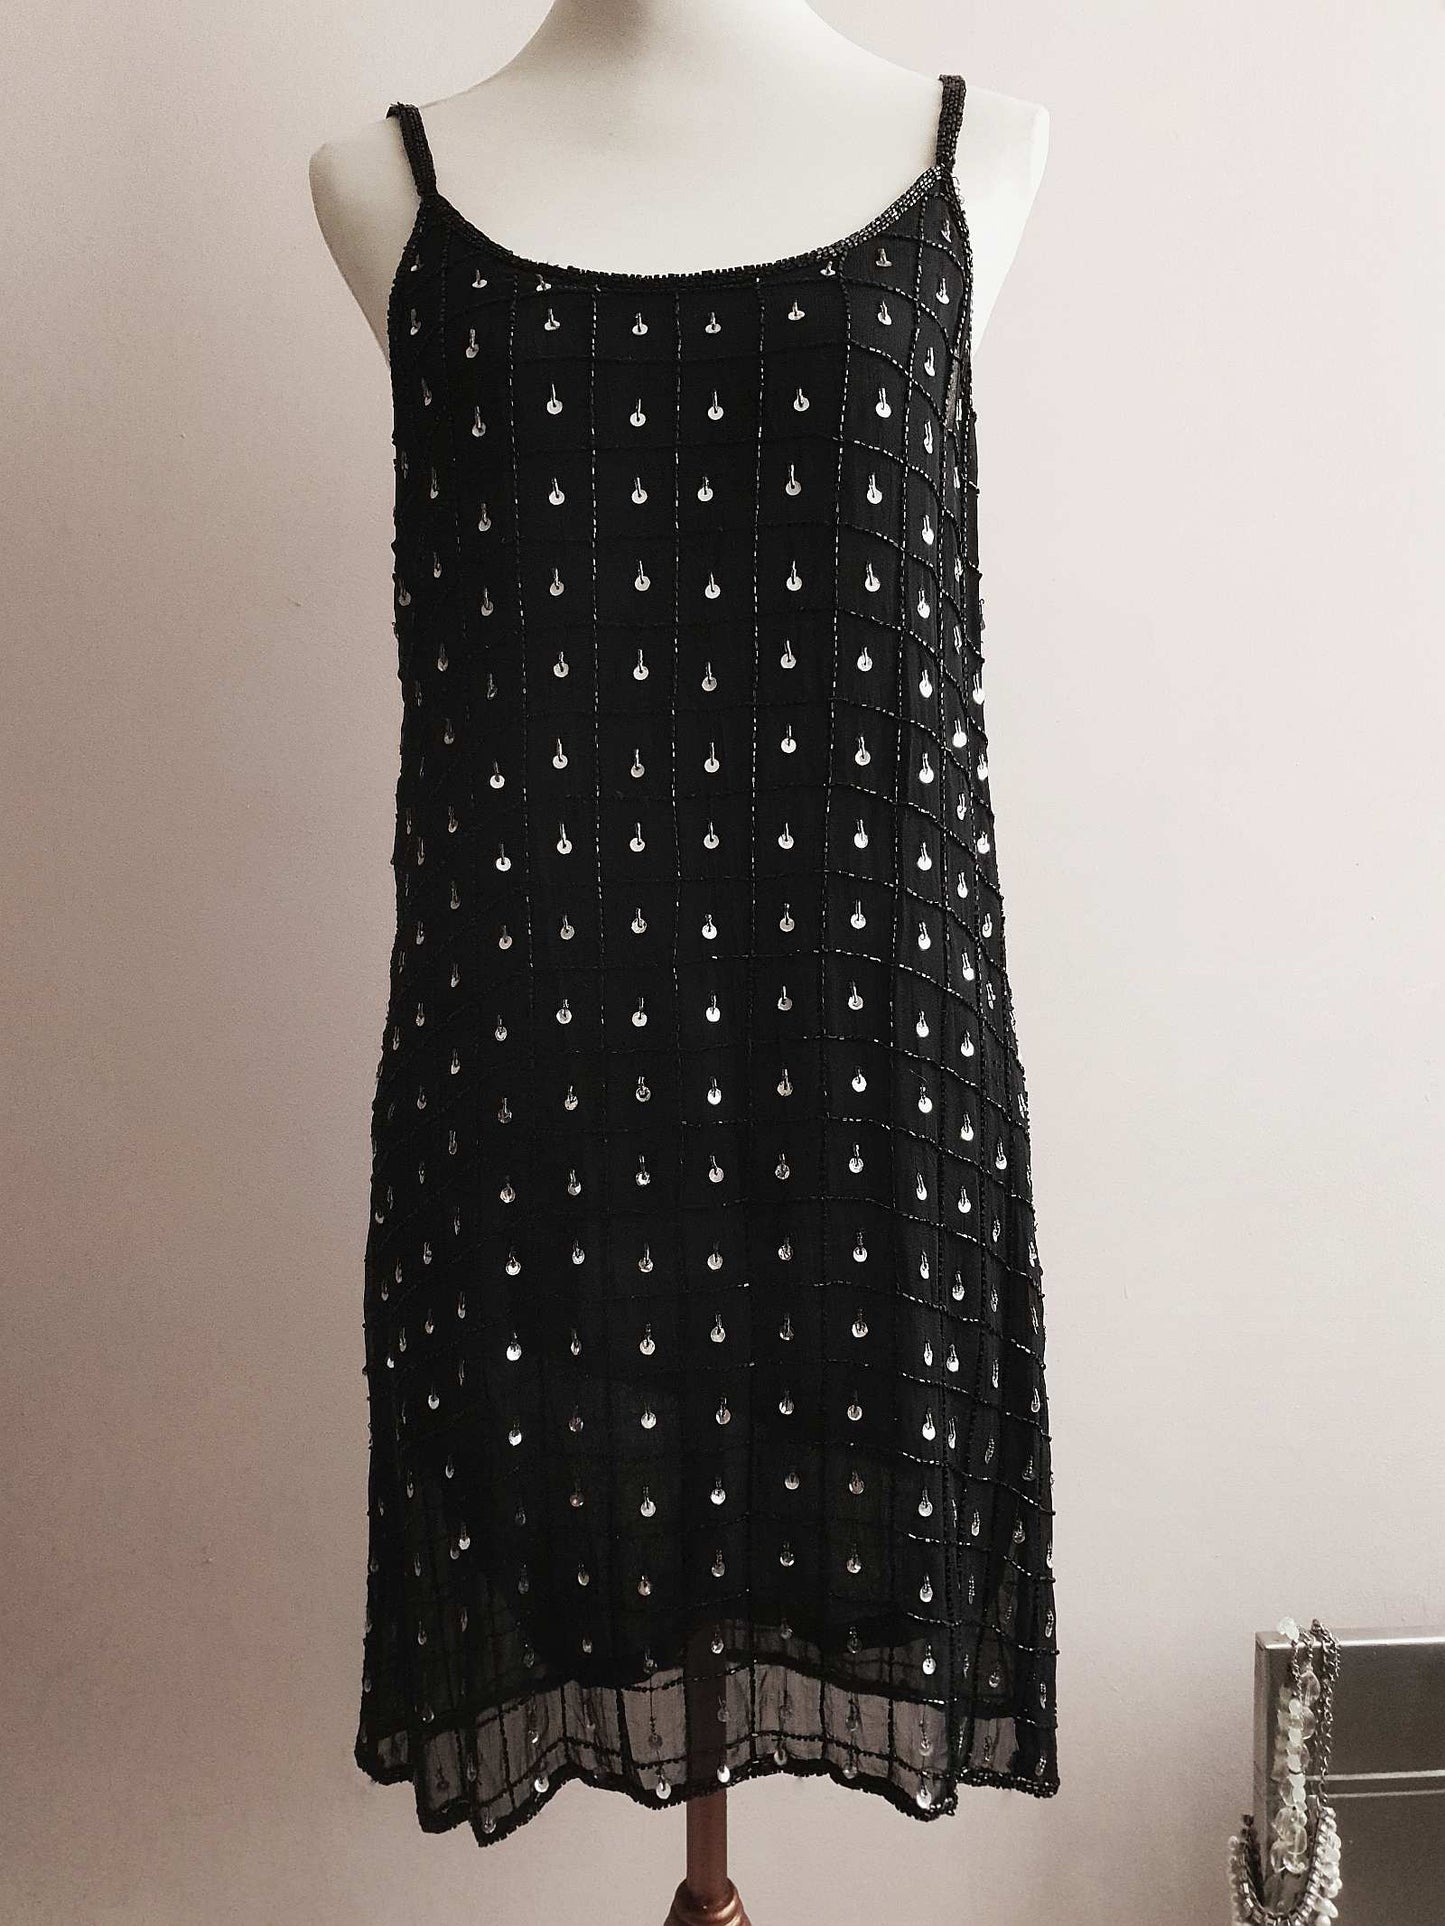 Cute 1980s Vintage Black Sequin and Beaded Party Dress - Size 10